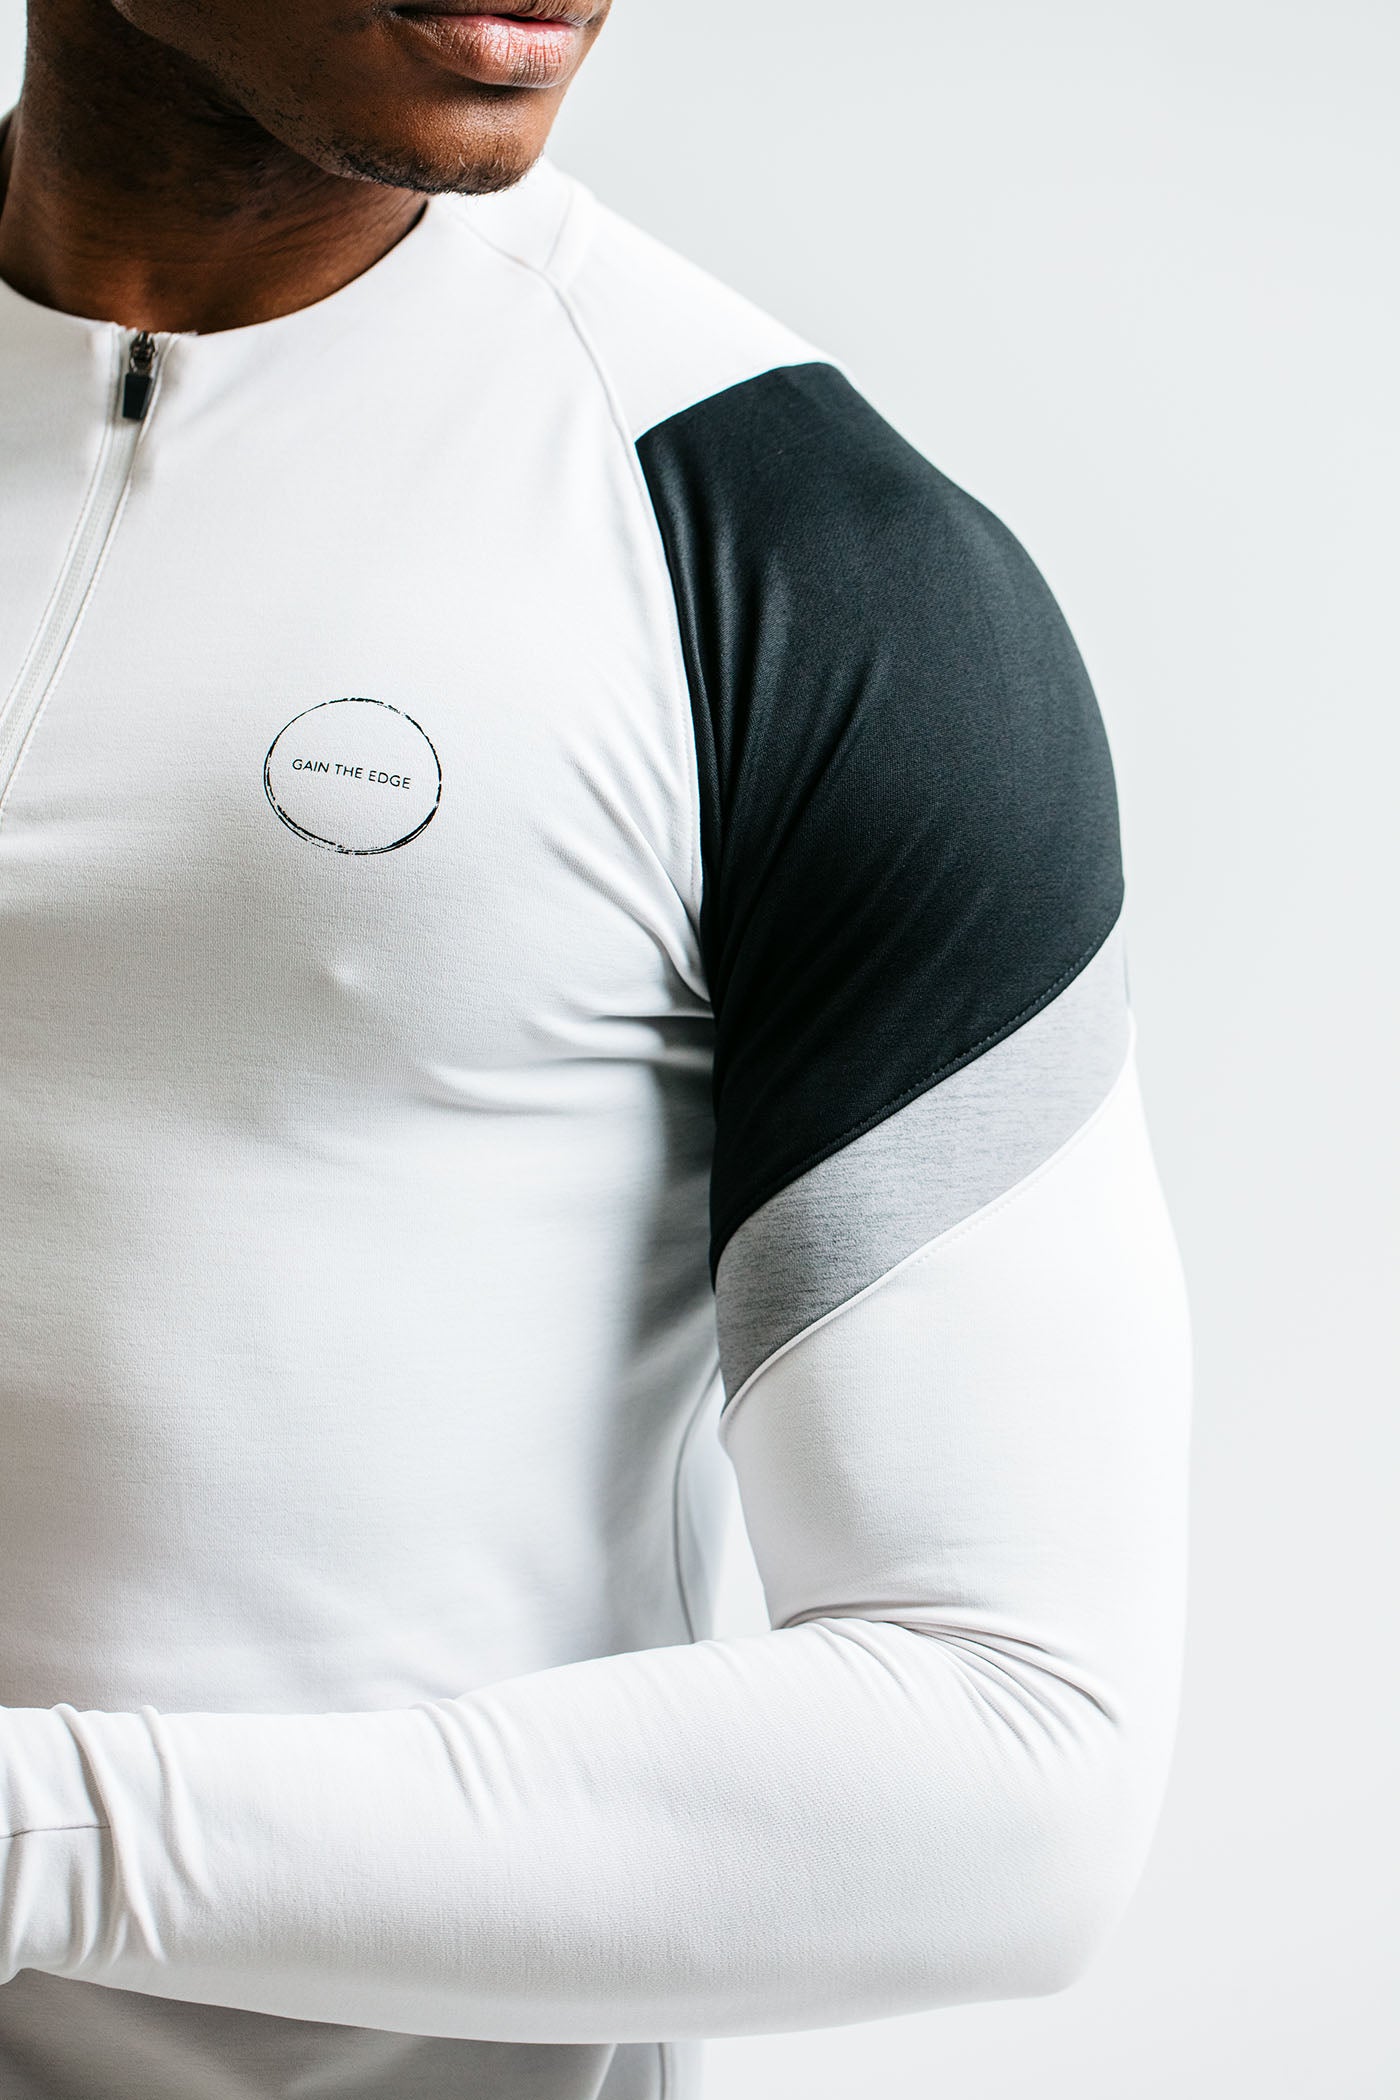 Elite Performance Top In White - Gain The Edge Official